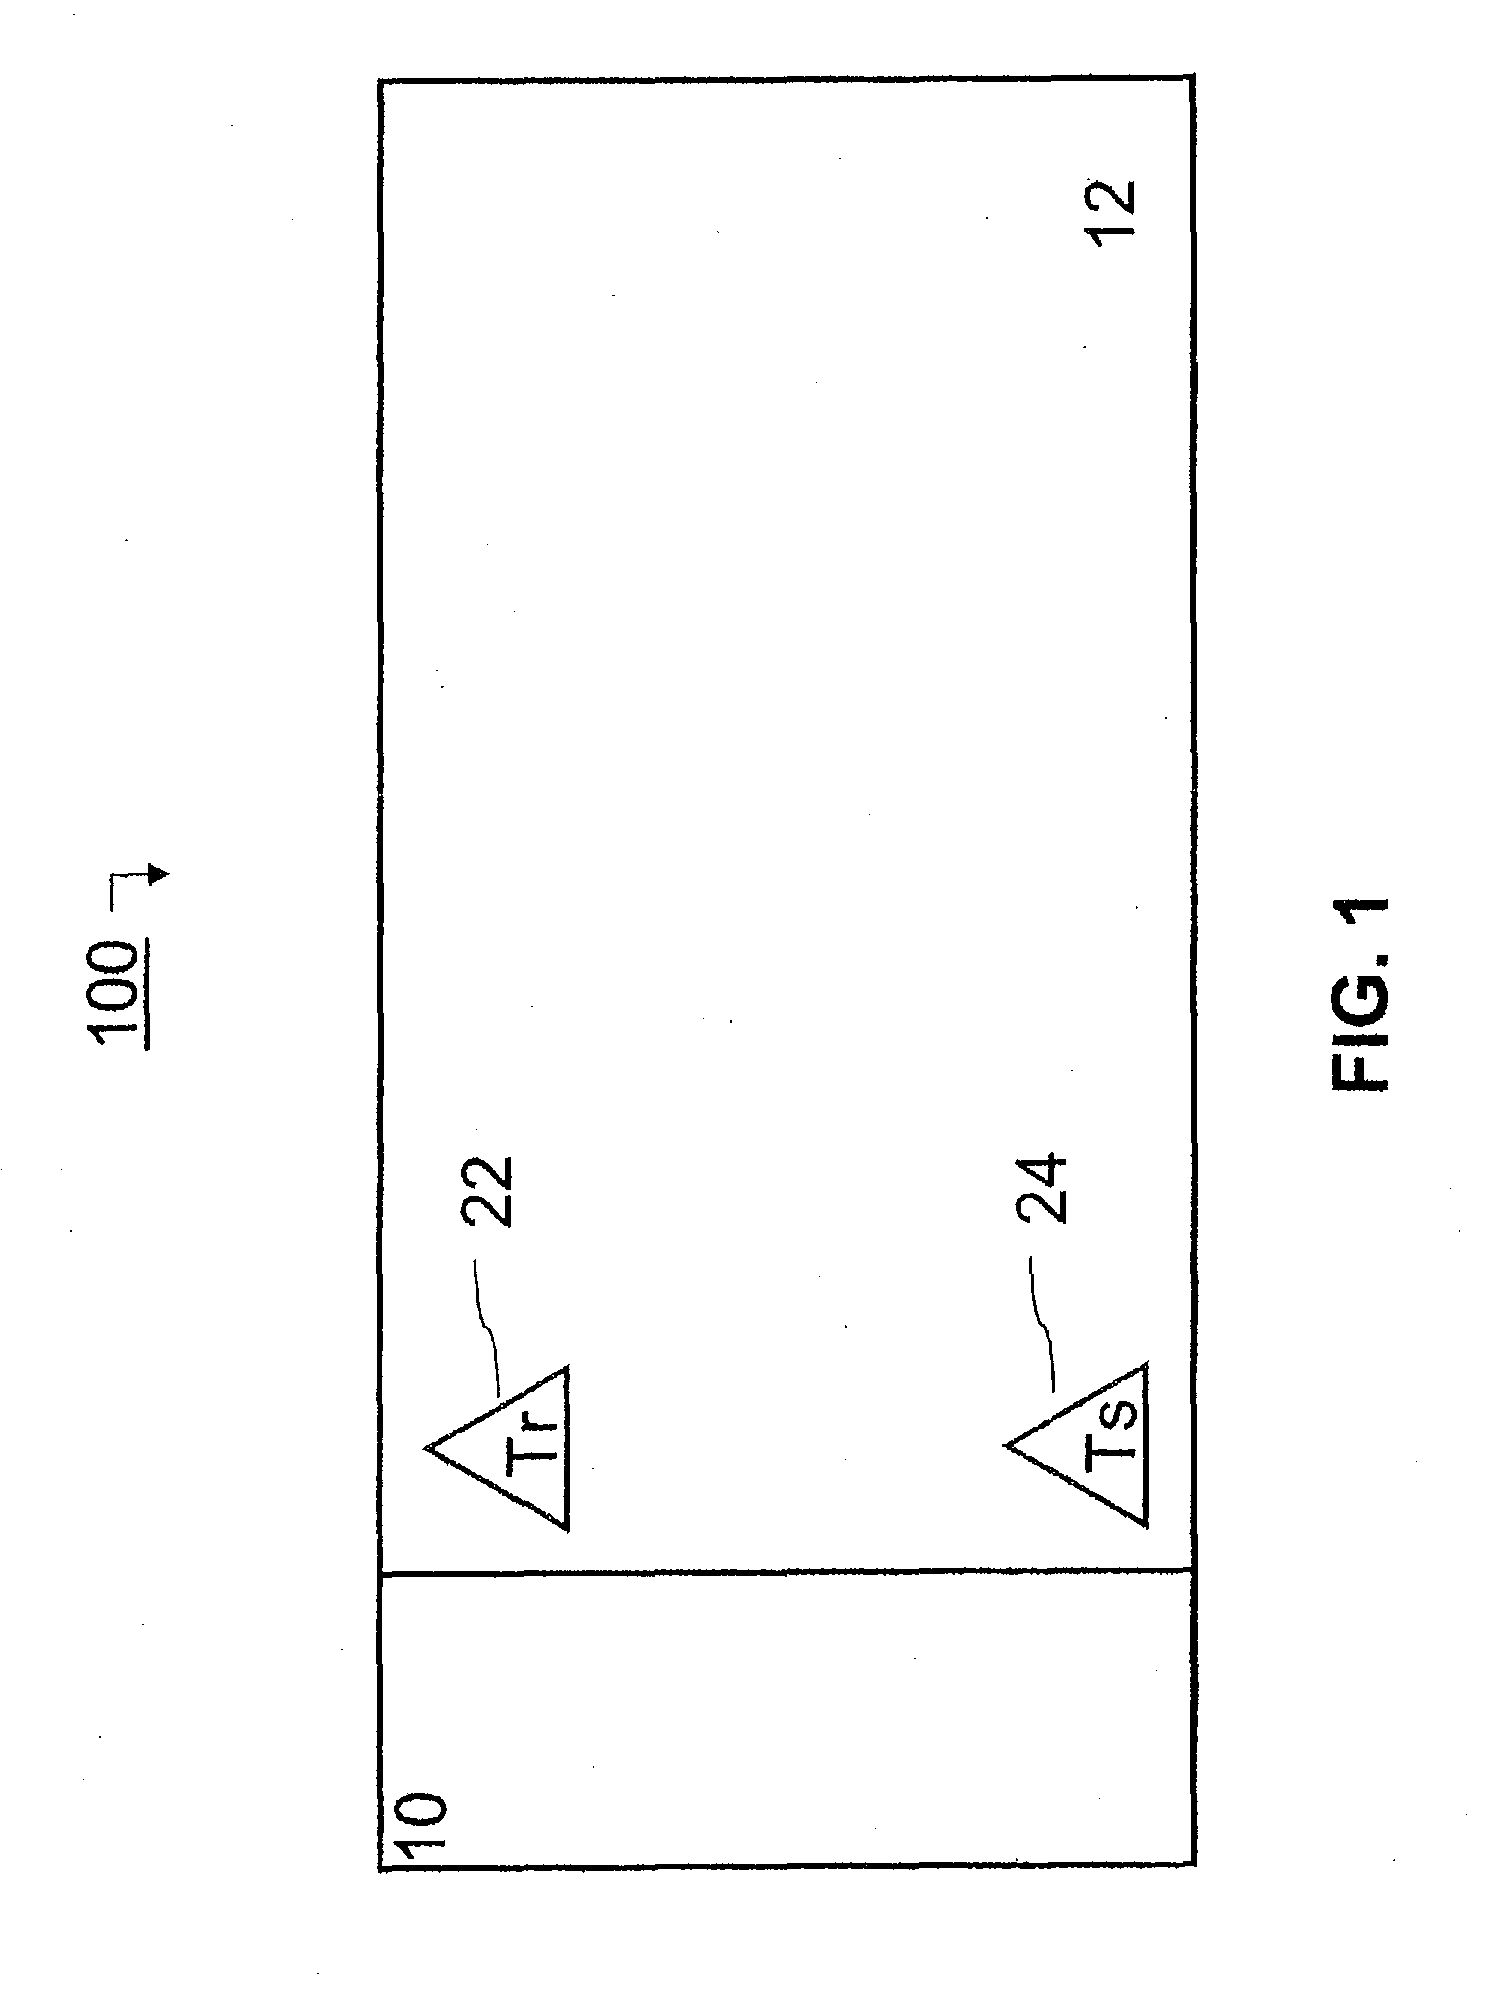 Transport refrigeration system and methods for same to address dynamic conditions